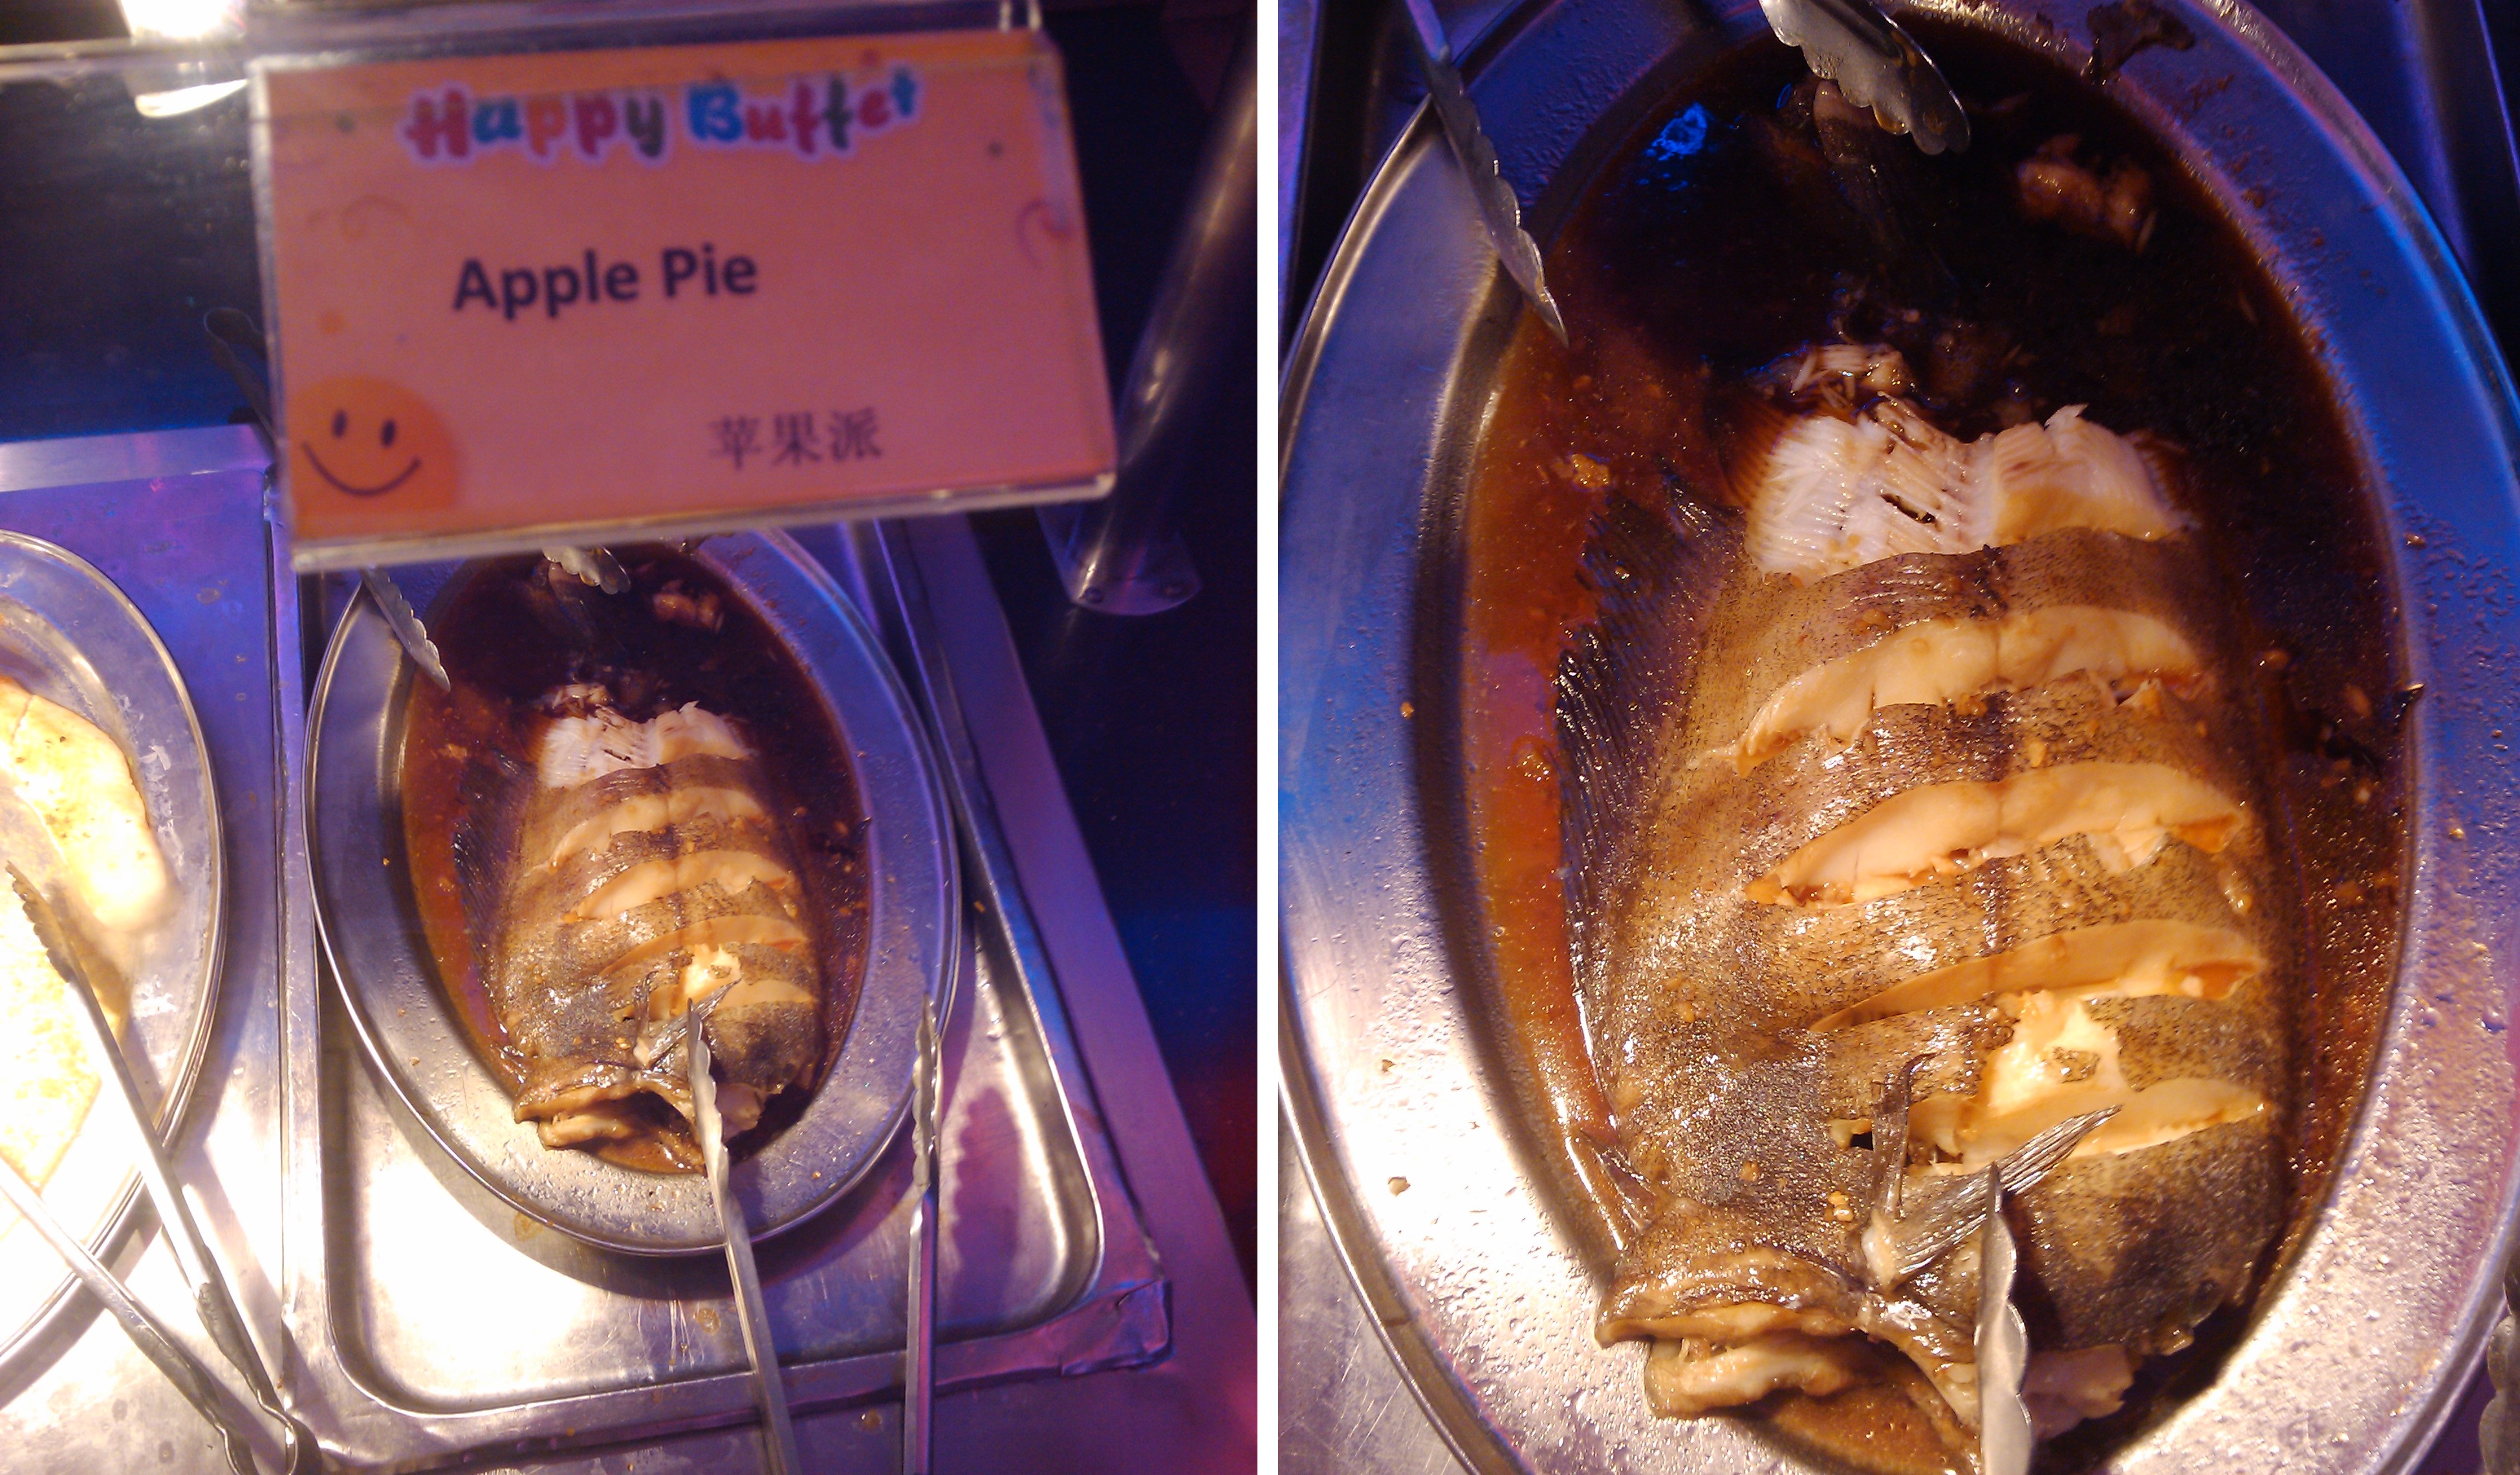 There's something fishy about this apple pie...